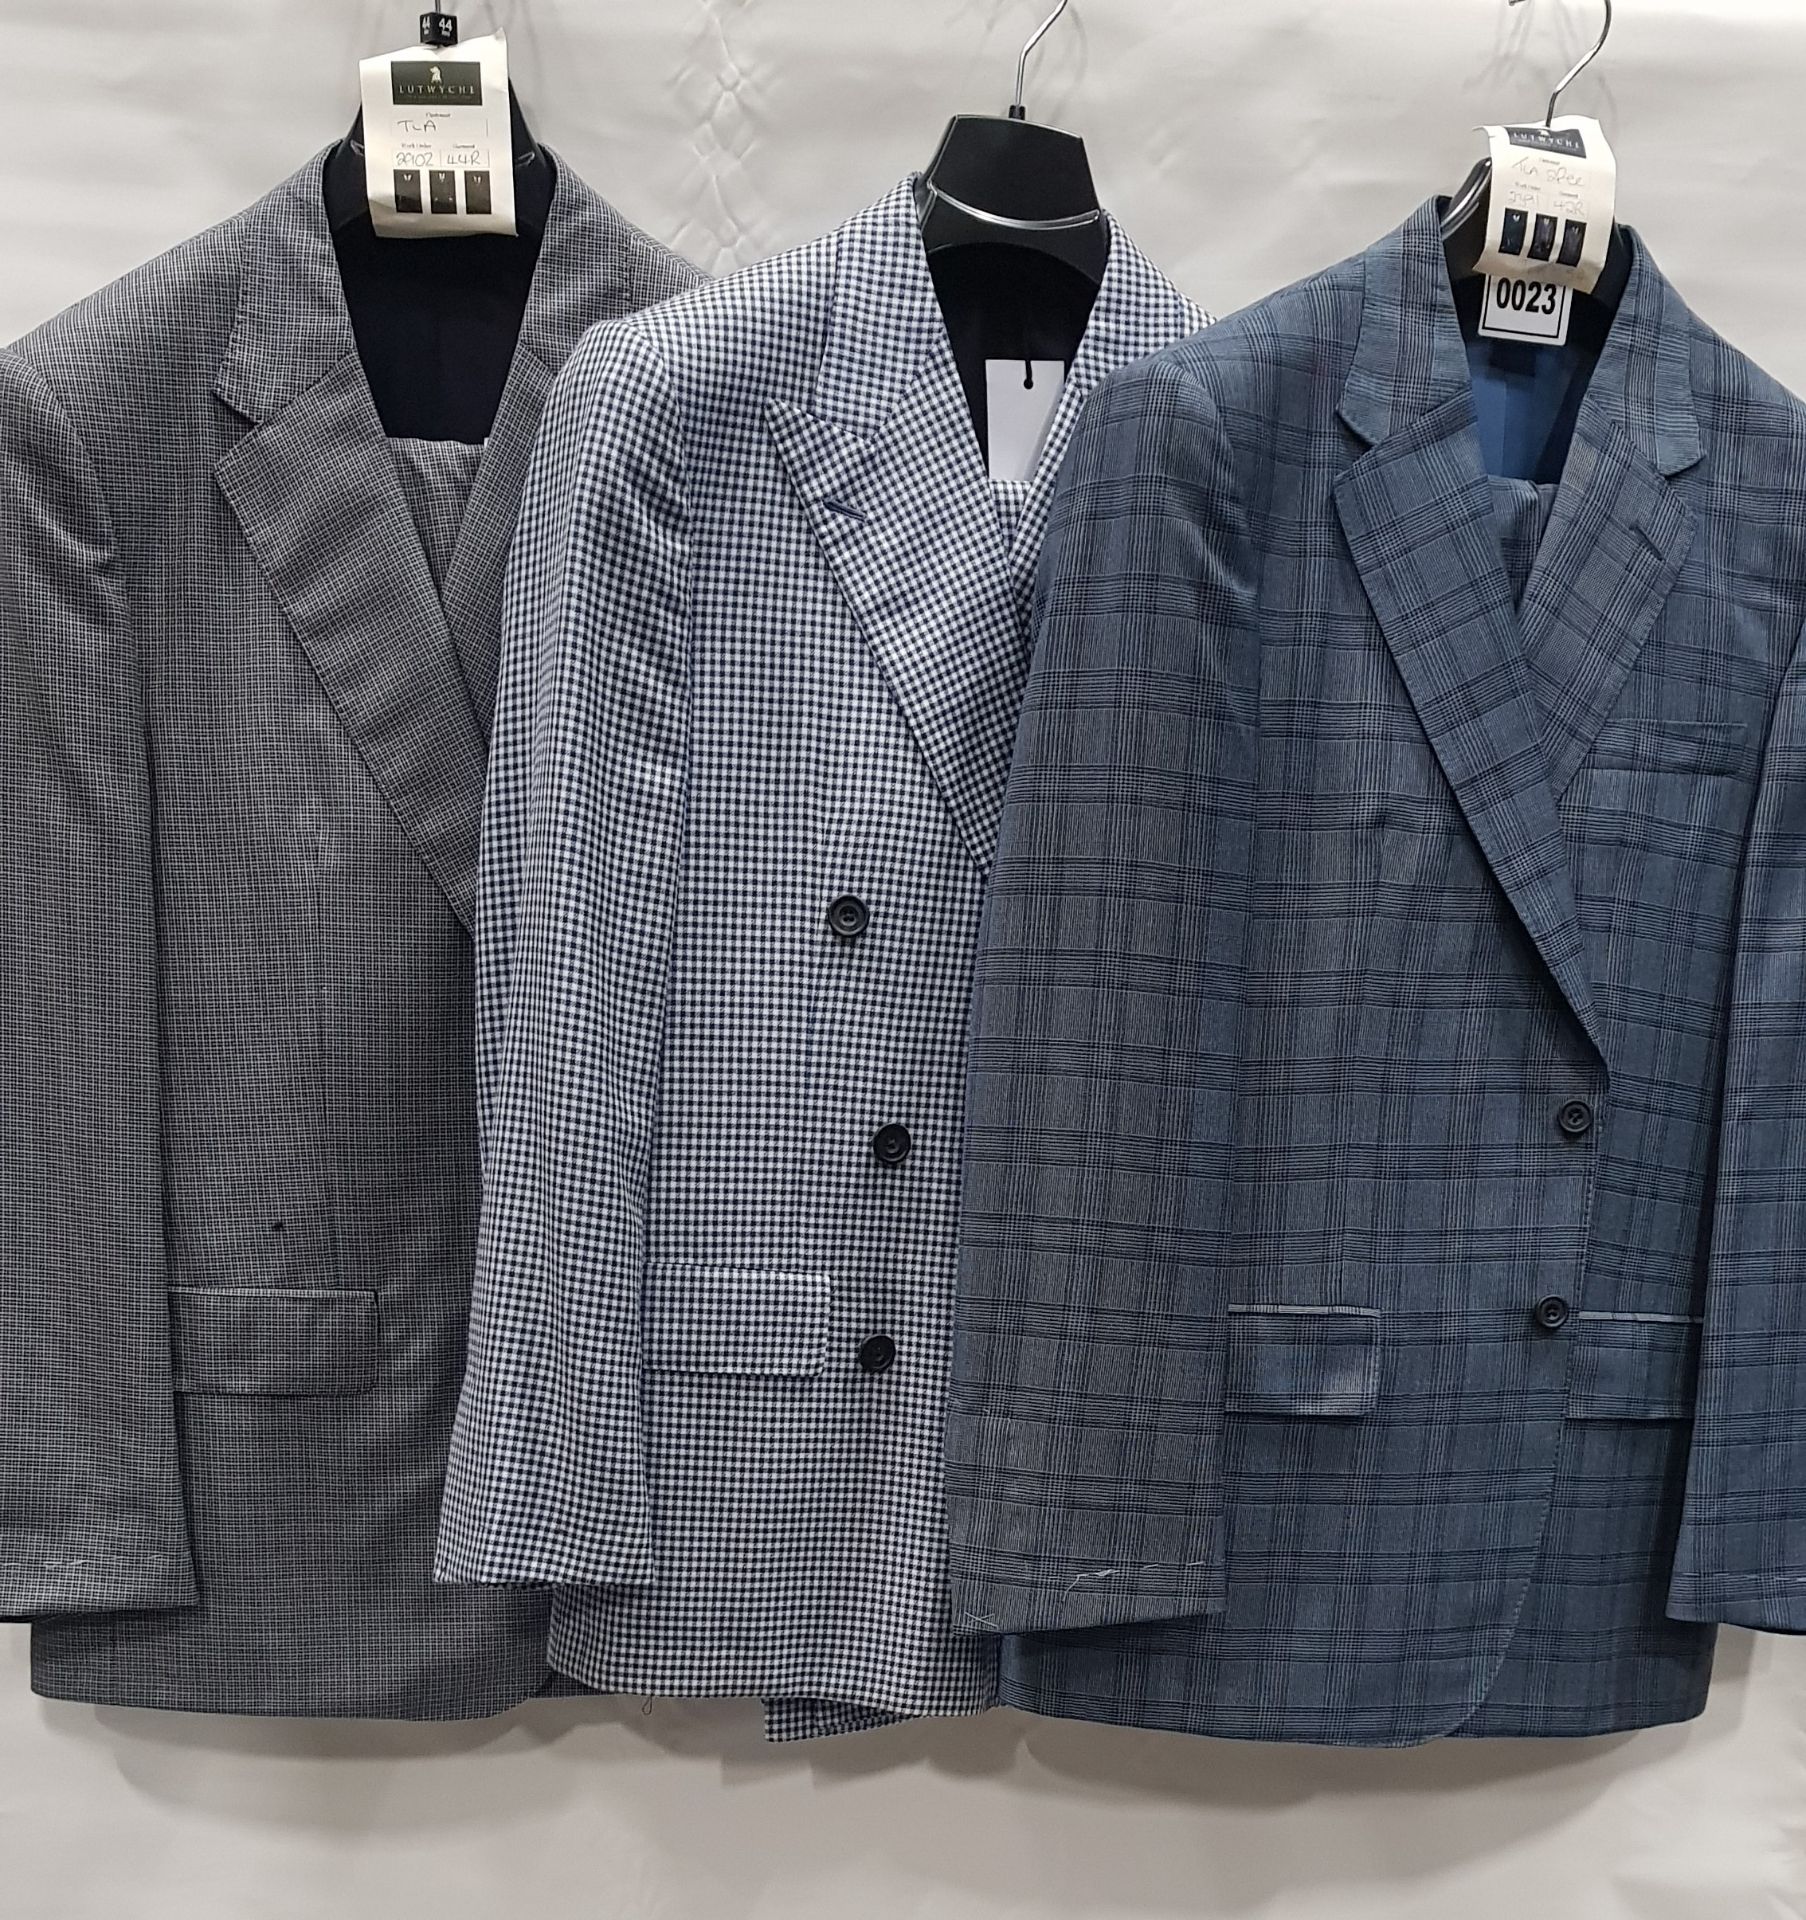 3 X BRAND NEW LUTWYCHE 2 PC COLOURED SUITS SIZES 42R, 40R, 44R (NOTE NOT FULLY TAILORED)